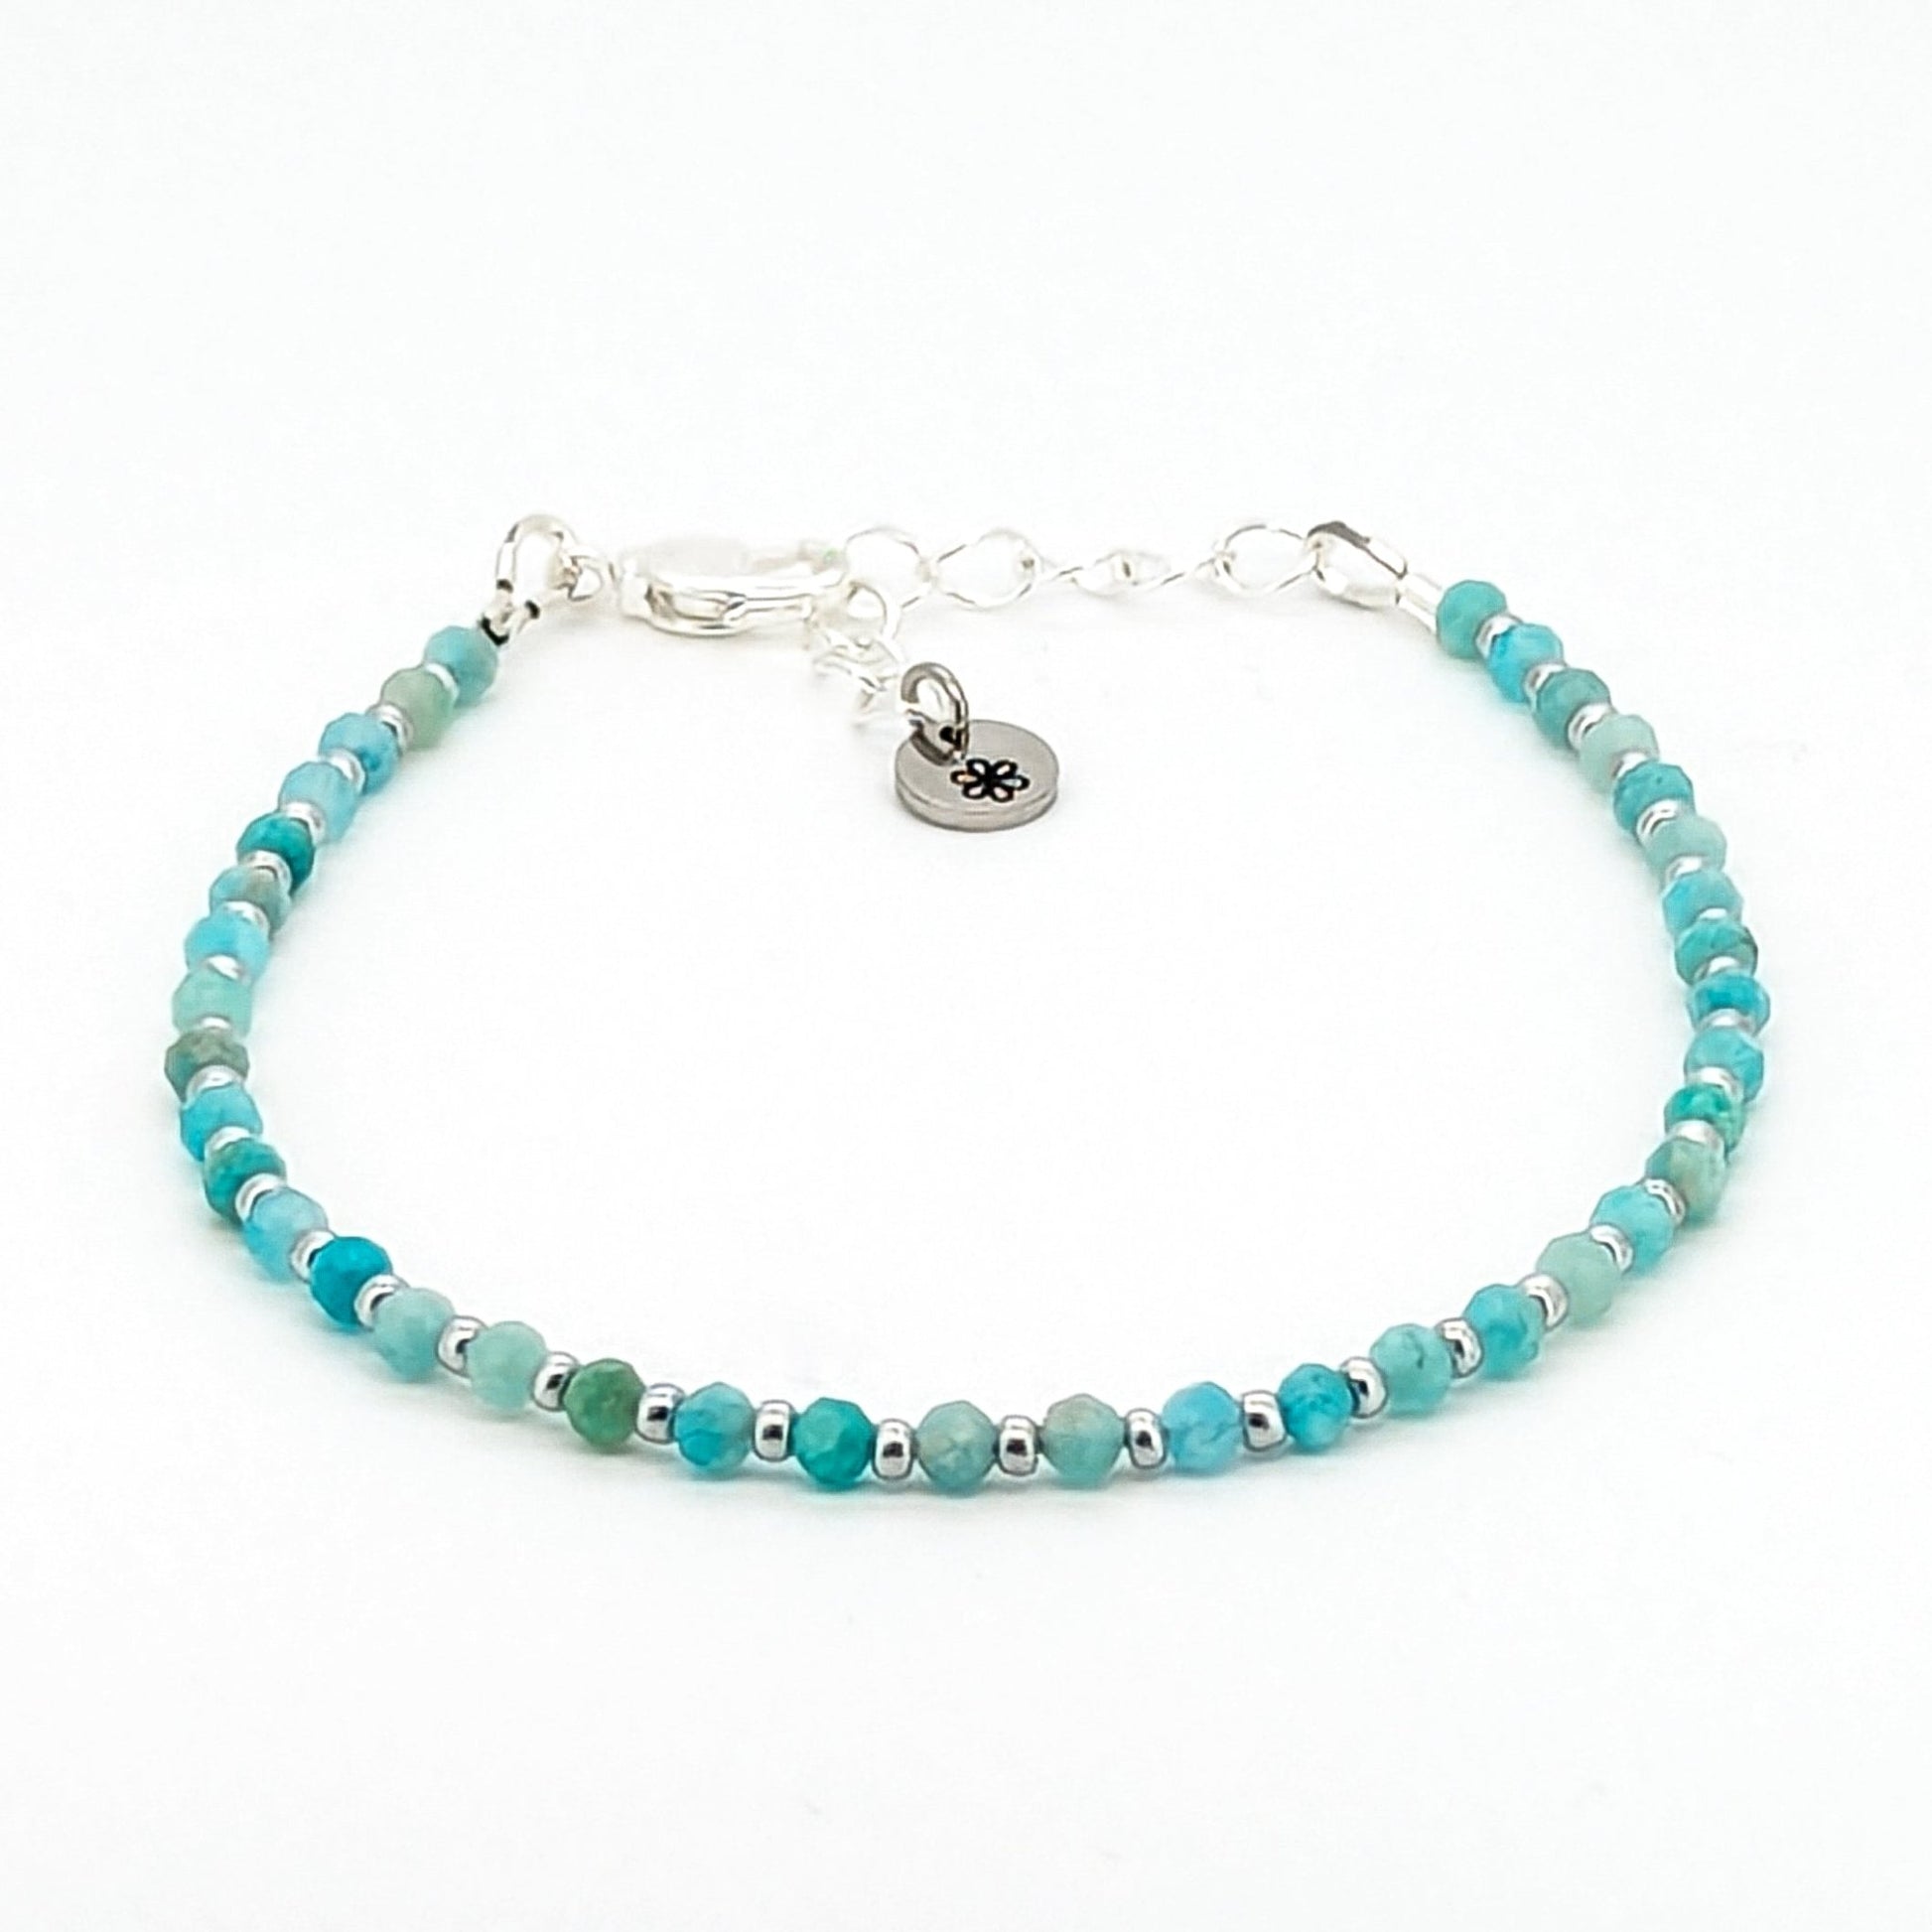 Amazonite and silver glass bead handmade bracelet - creations by cherie